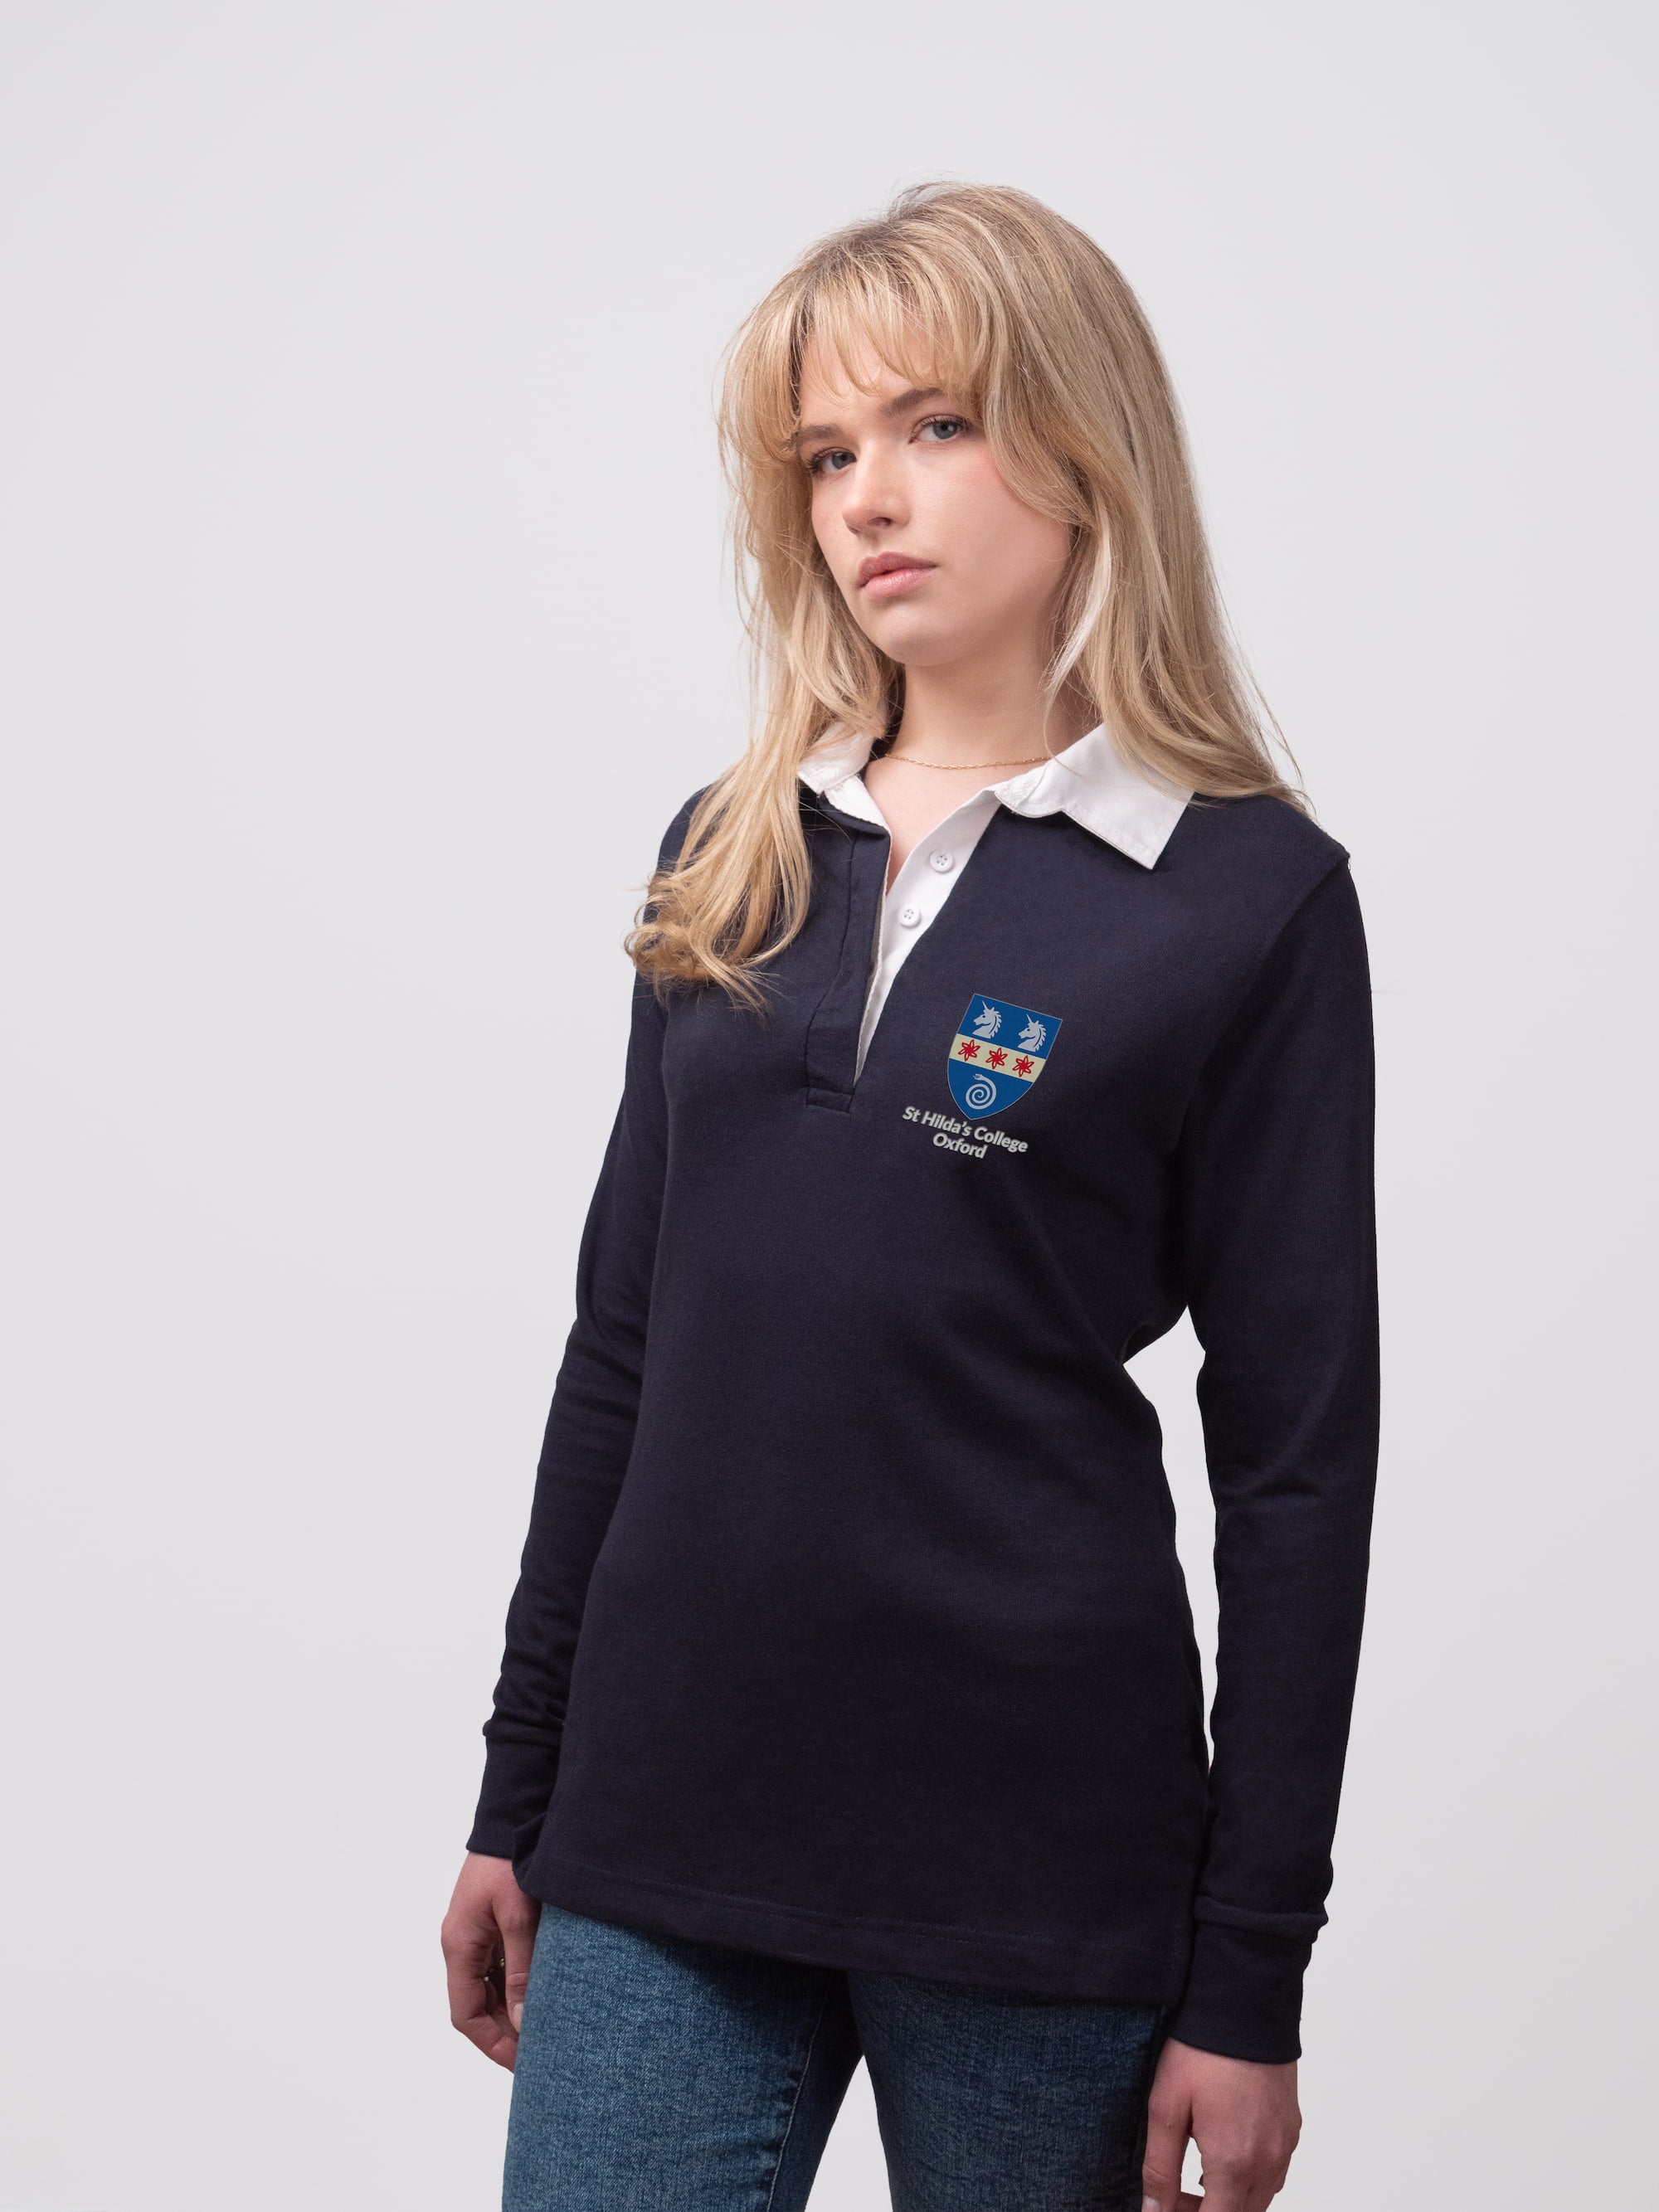 Student wearing a navy St Hilda's College rugby shirt with embroidered crest